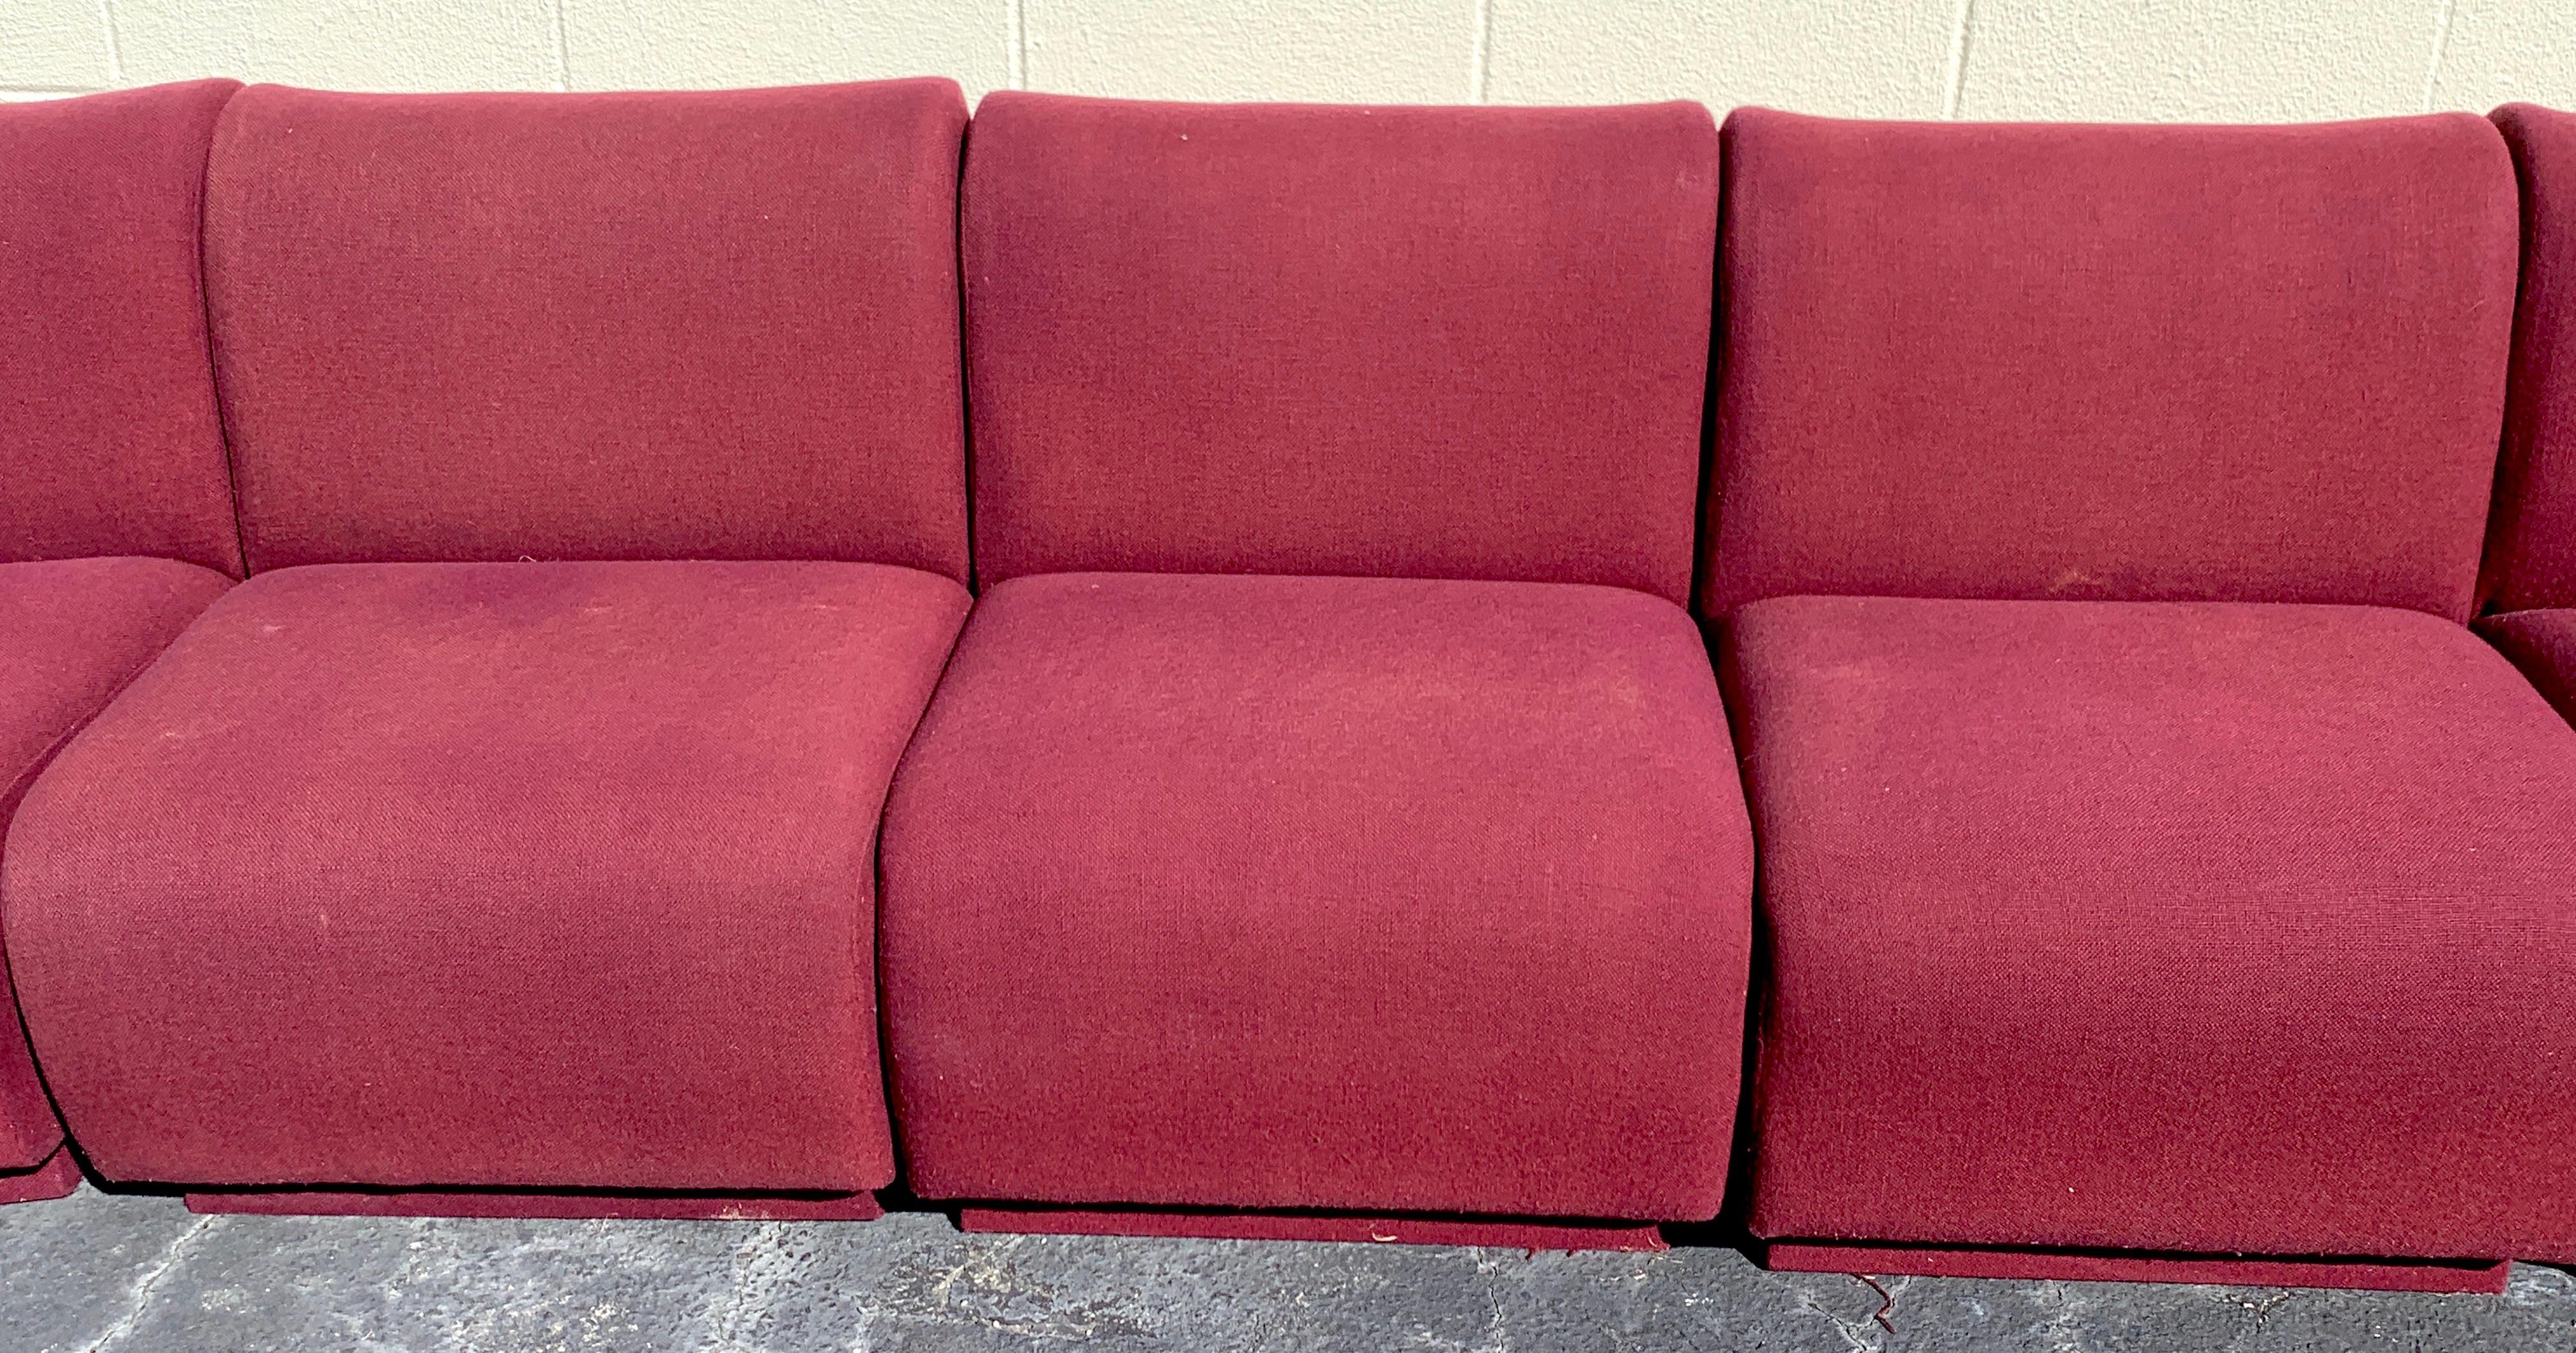 Upholstery 11-Piece Modular Living Room Attributed to Milo Baughman for Thayer Coggin For Sale